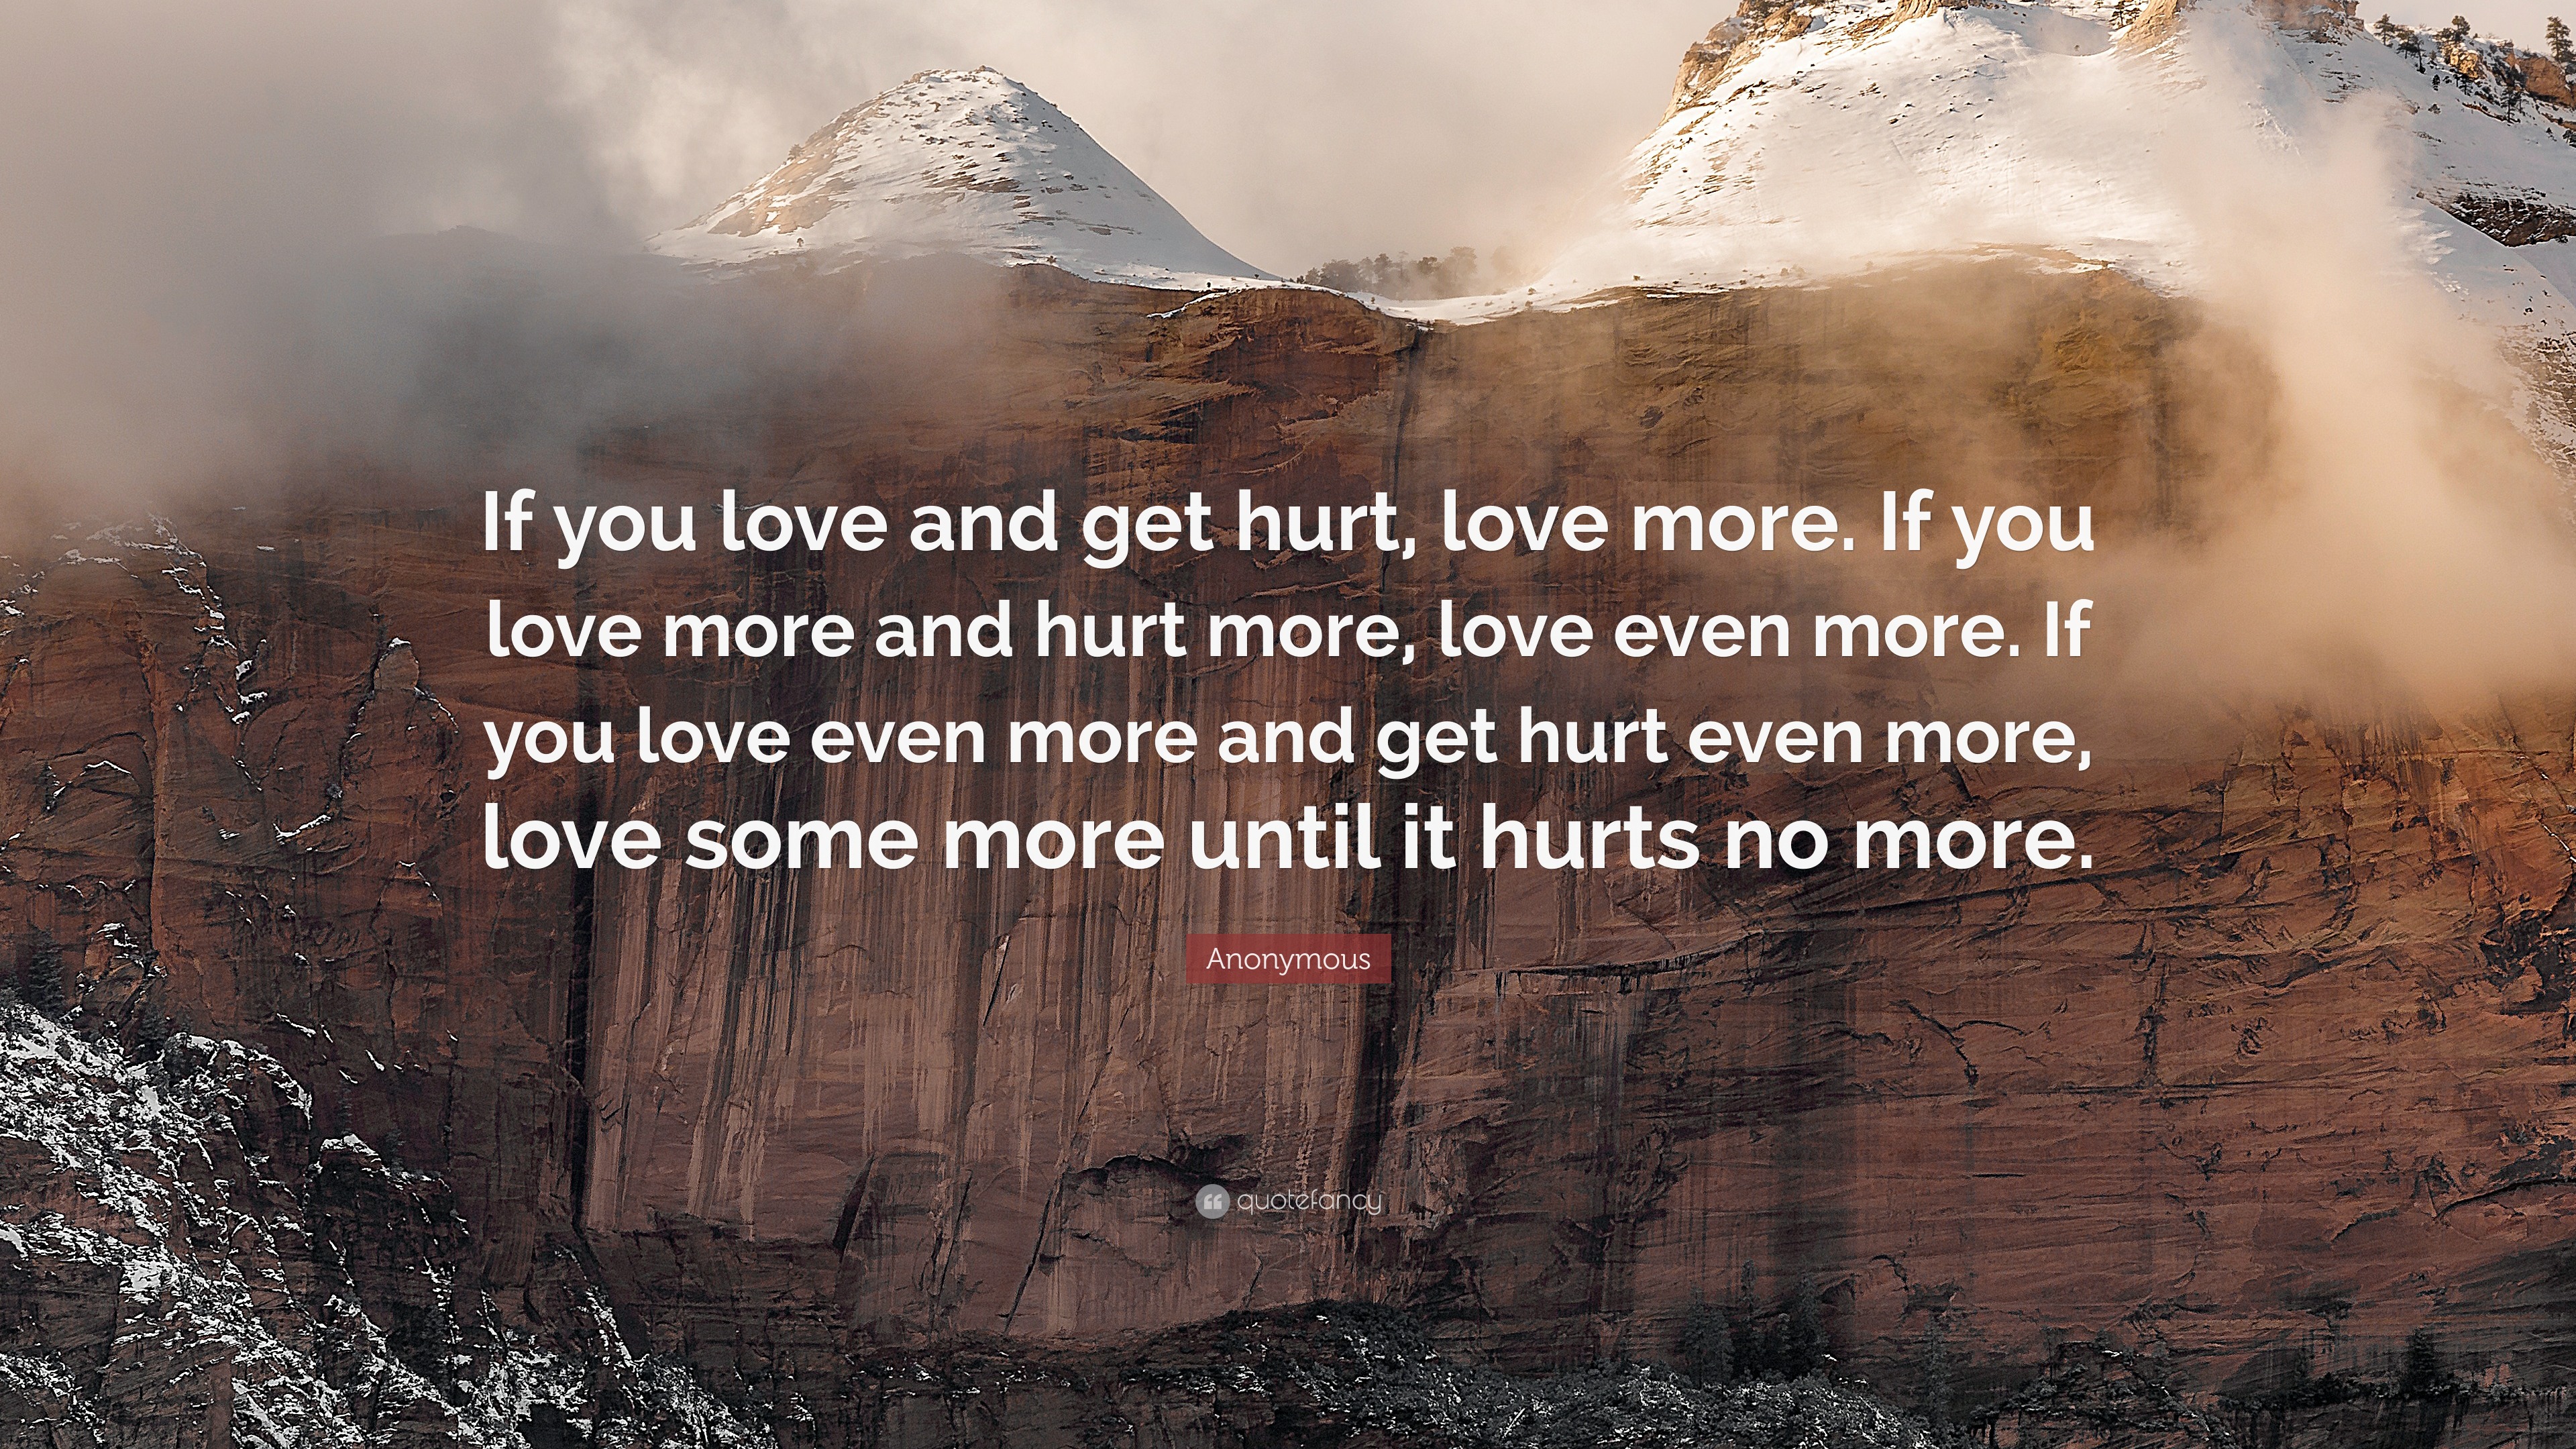 Love Hurts Wallpapers ~ Quotes Love Hurts Wallpapers. Quotesgram ...